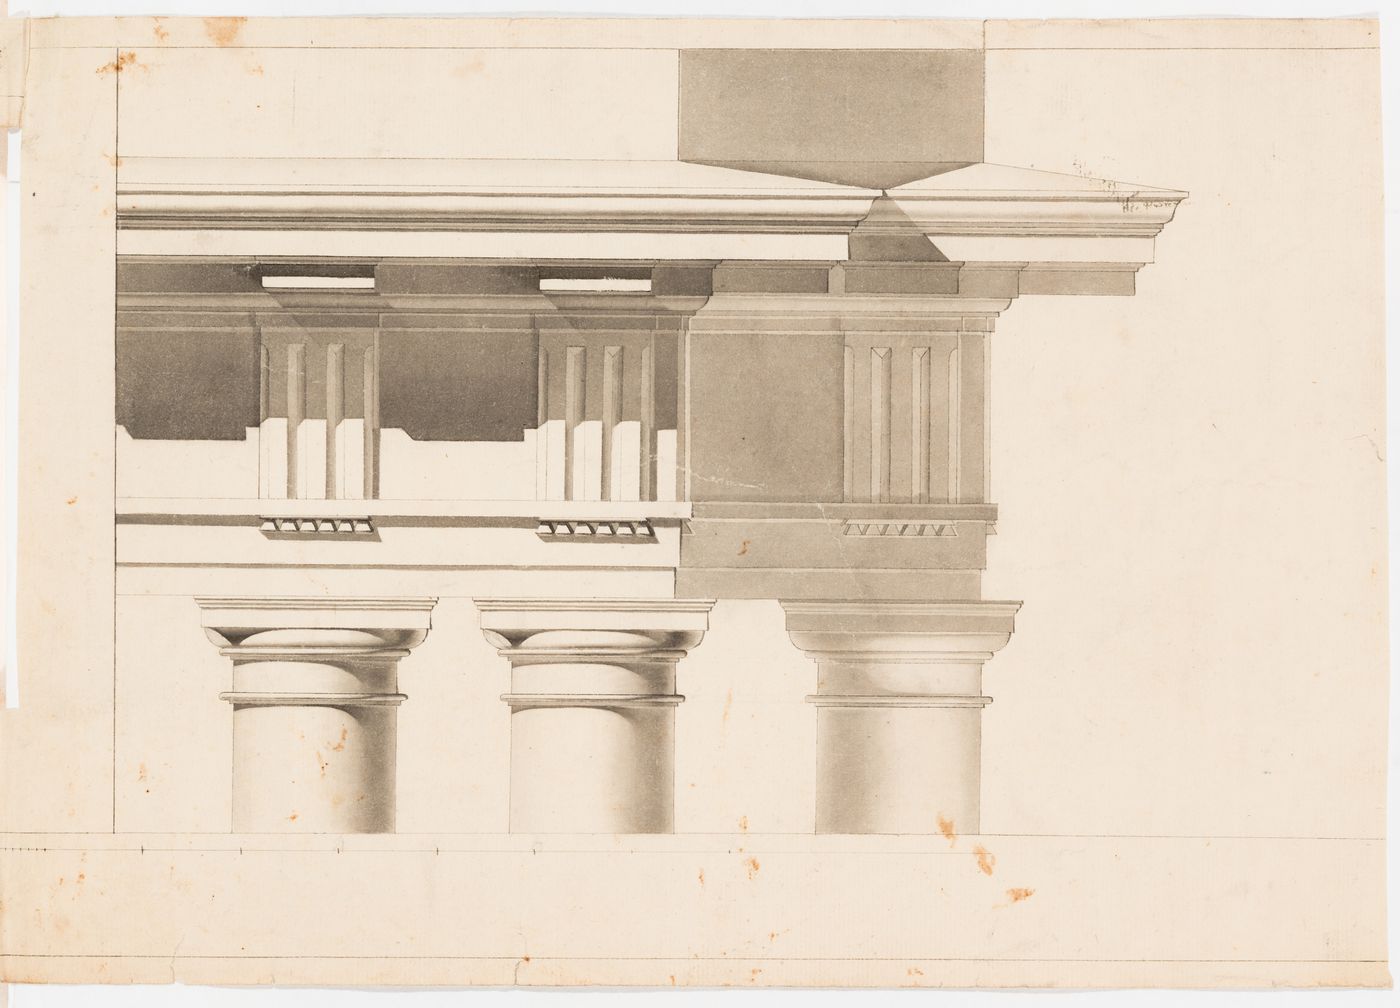 Partial elevation of a shaft, column and entablature of a building combining elements of the Tuscan and Doric orders, and a profile of the pedestal base of Trajan's Column, Rome